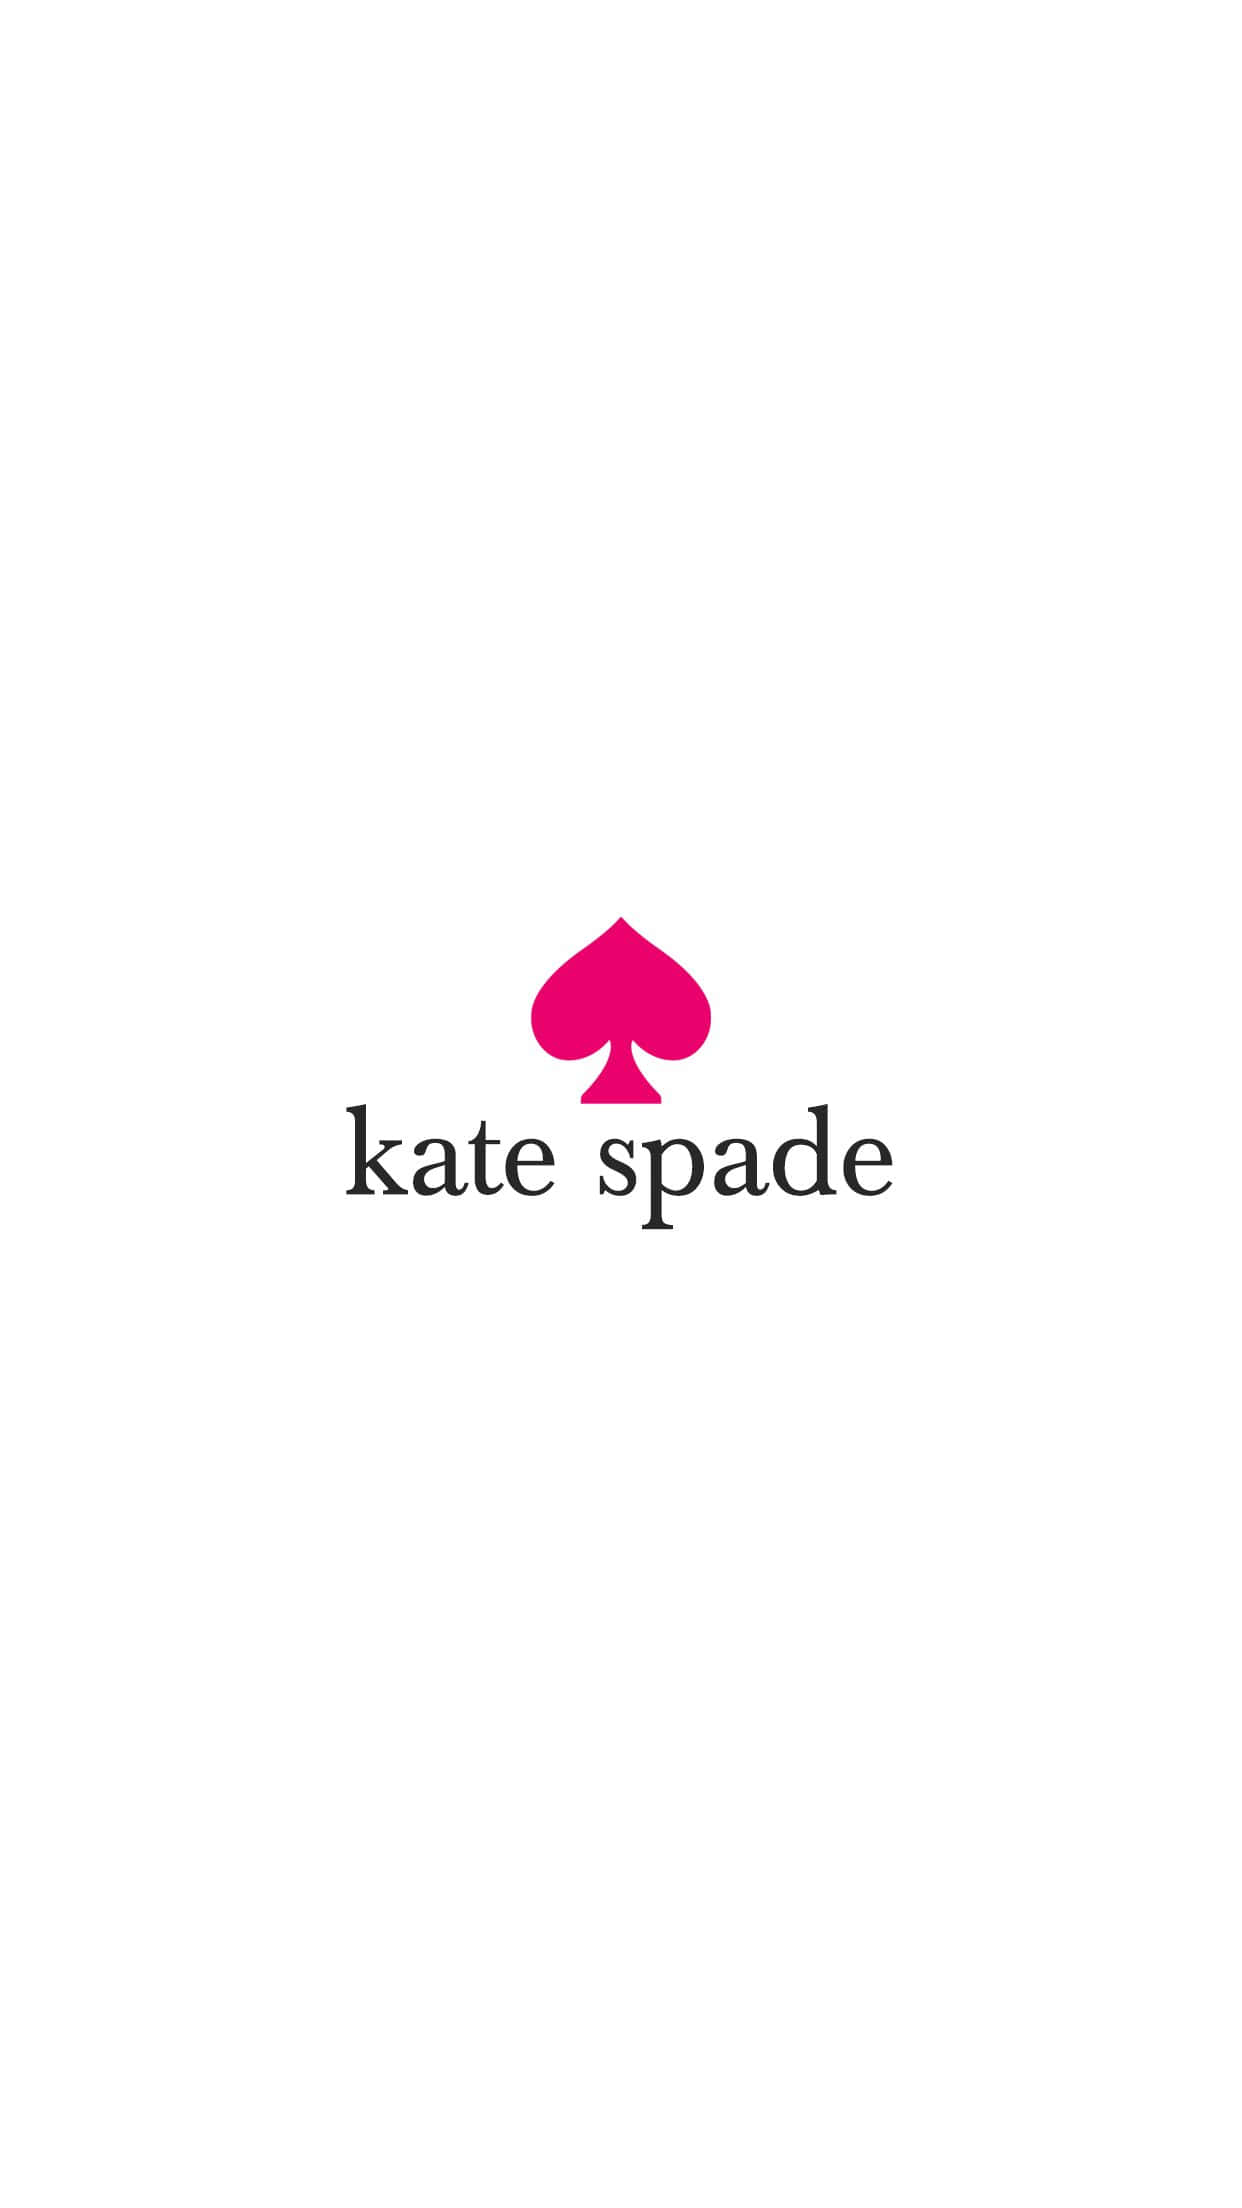 Get ready for the weekend with this cheerful Kate Spade wallpaper.